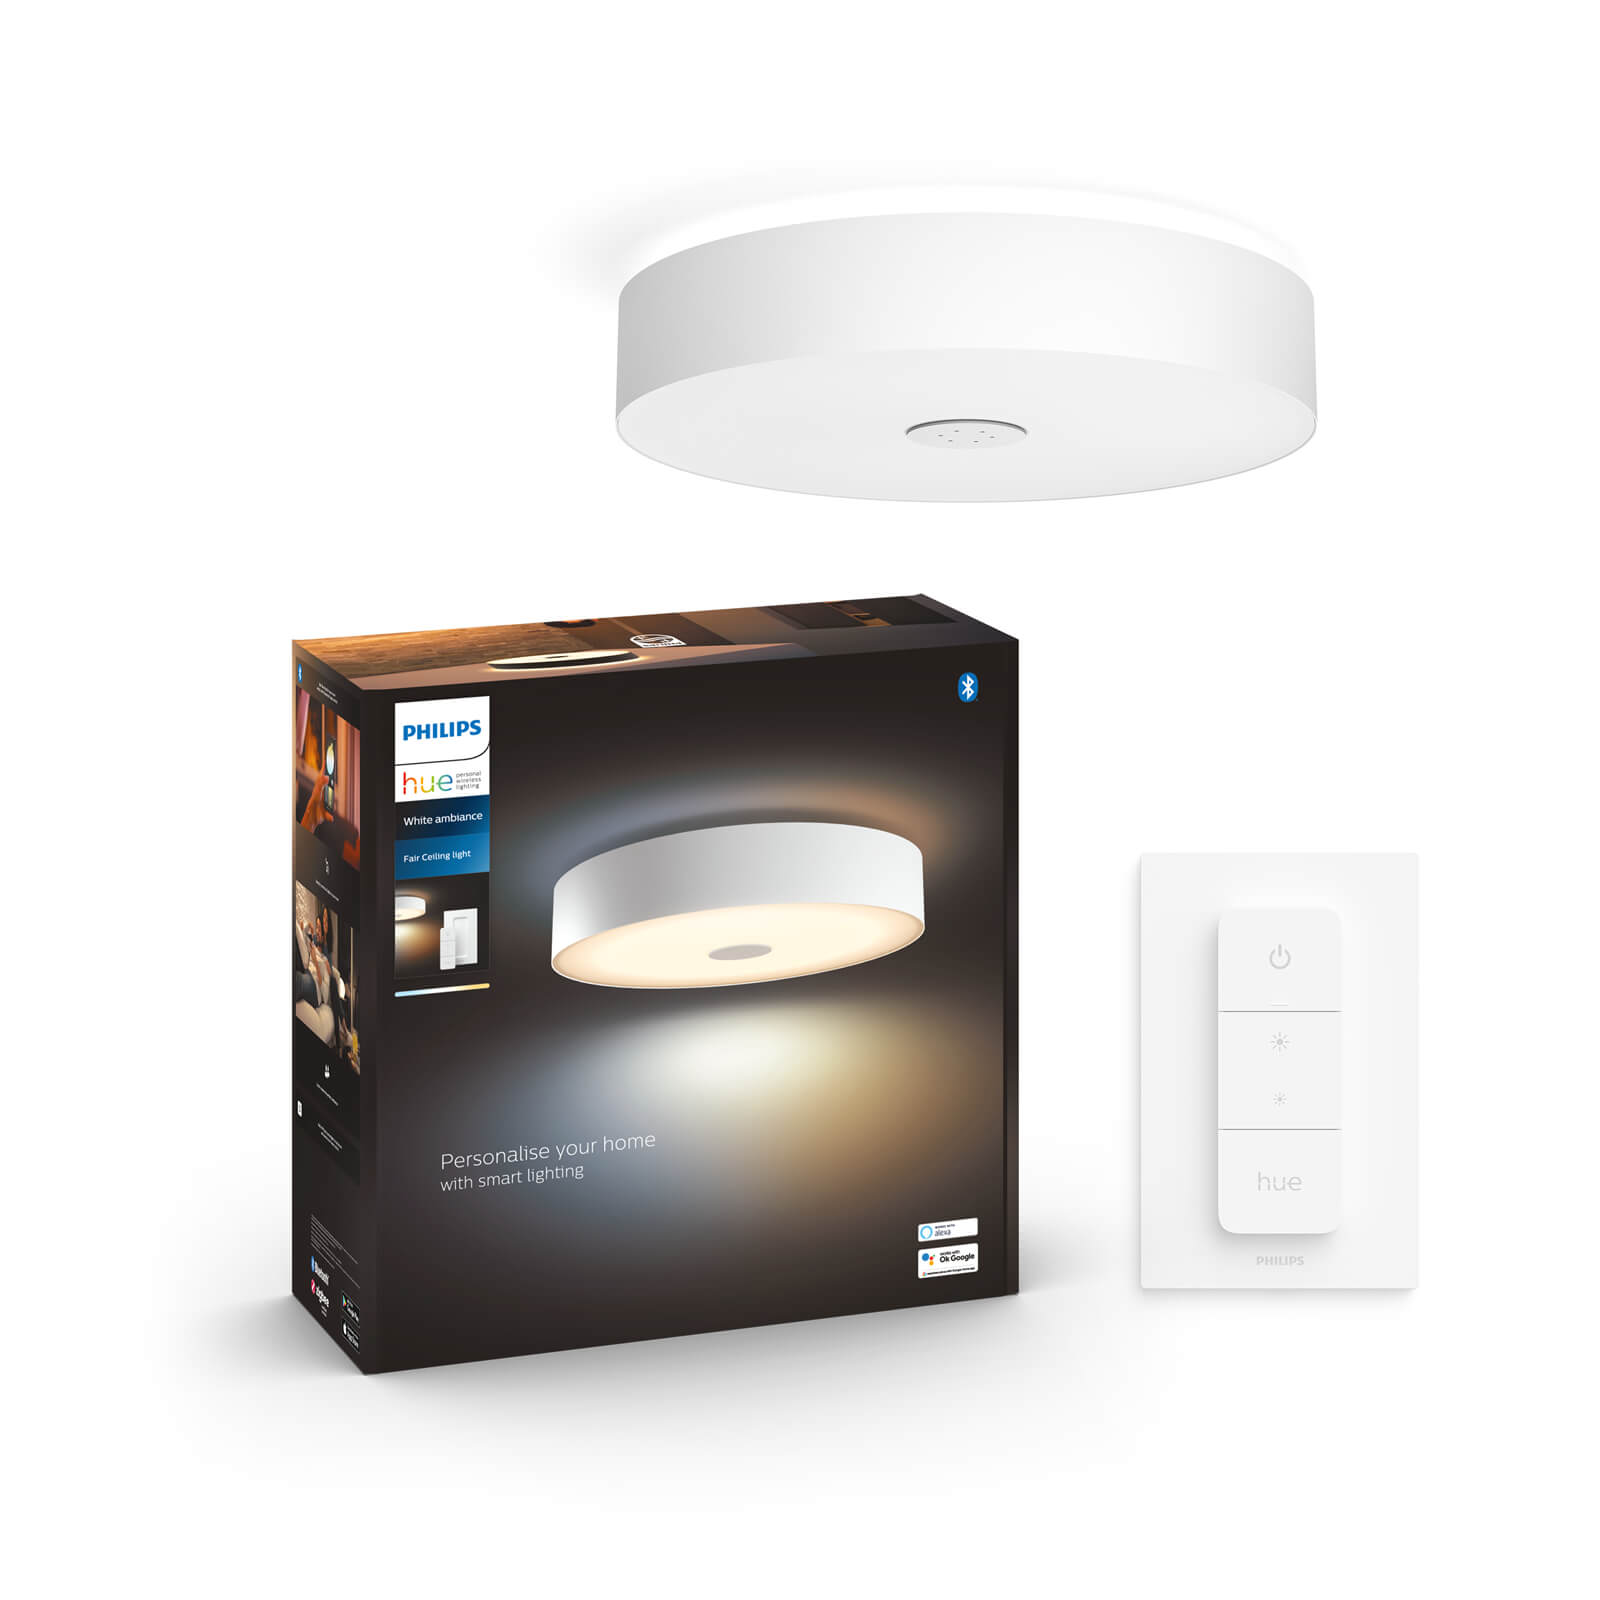 Philips Hue Fair plafondlamp - White Ambiance - wit (incl. Dimswitch)